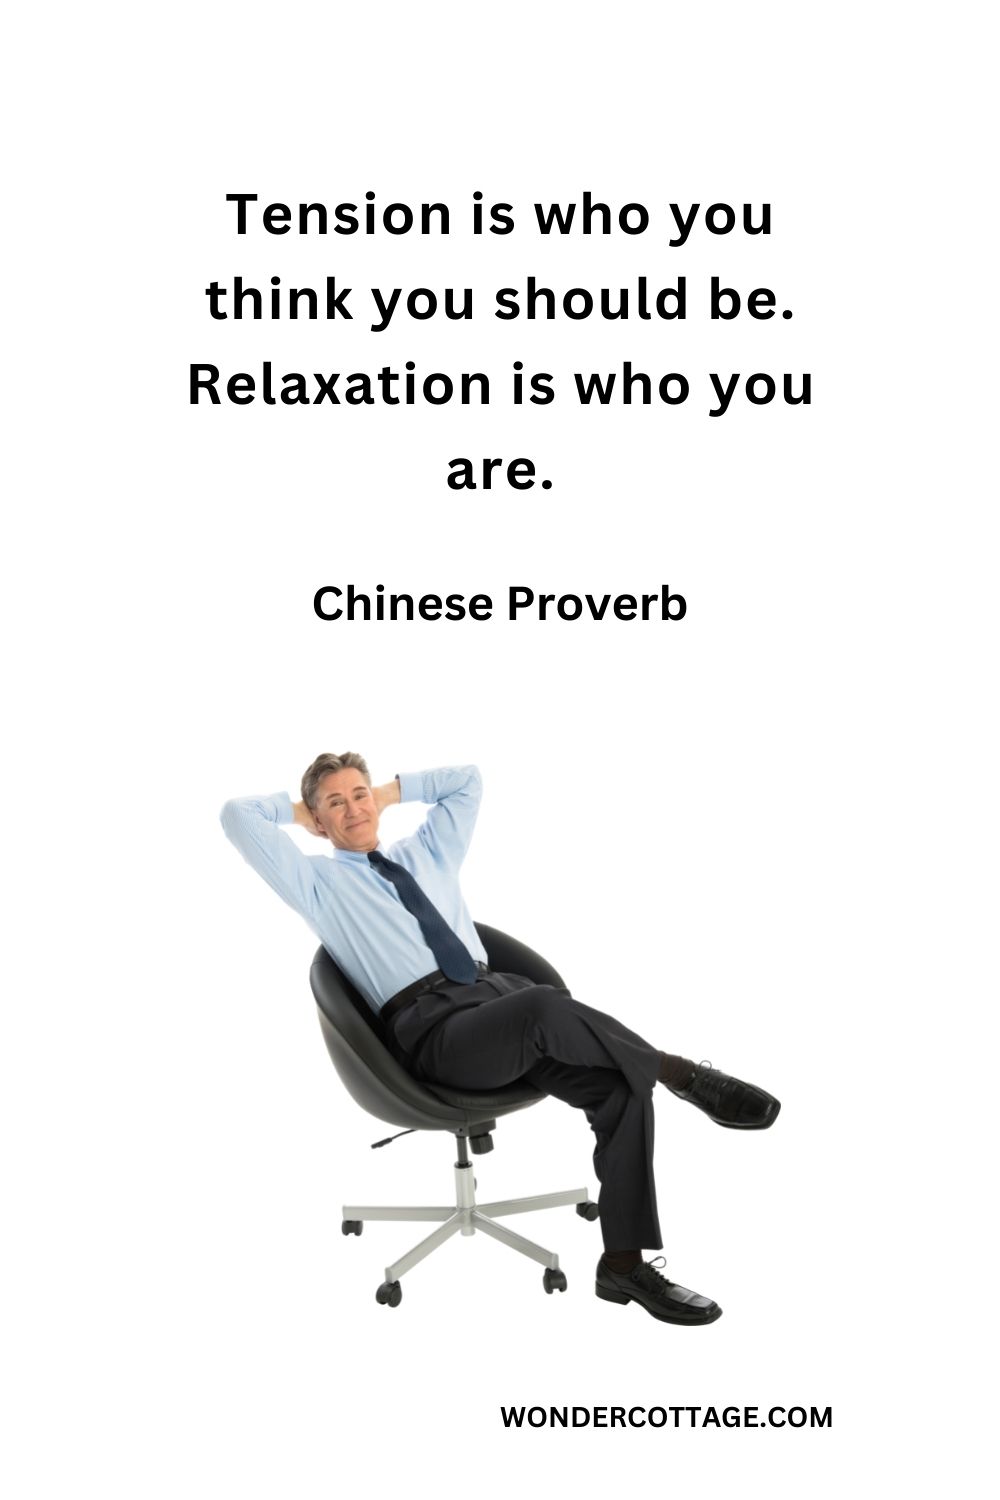 Tension is who you think you should be. Relaxation is who you are. Chinese Proverb